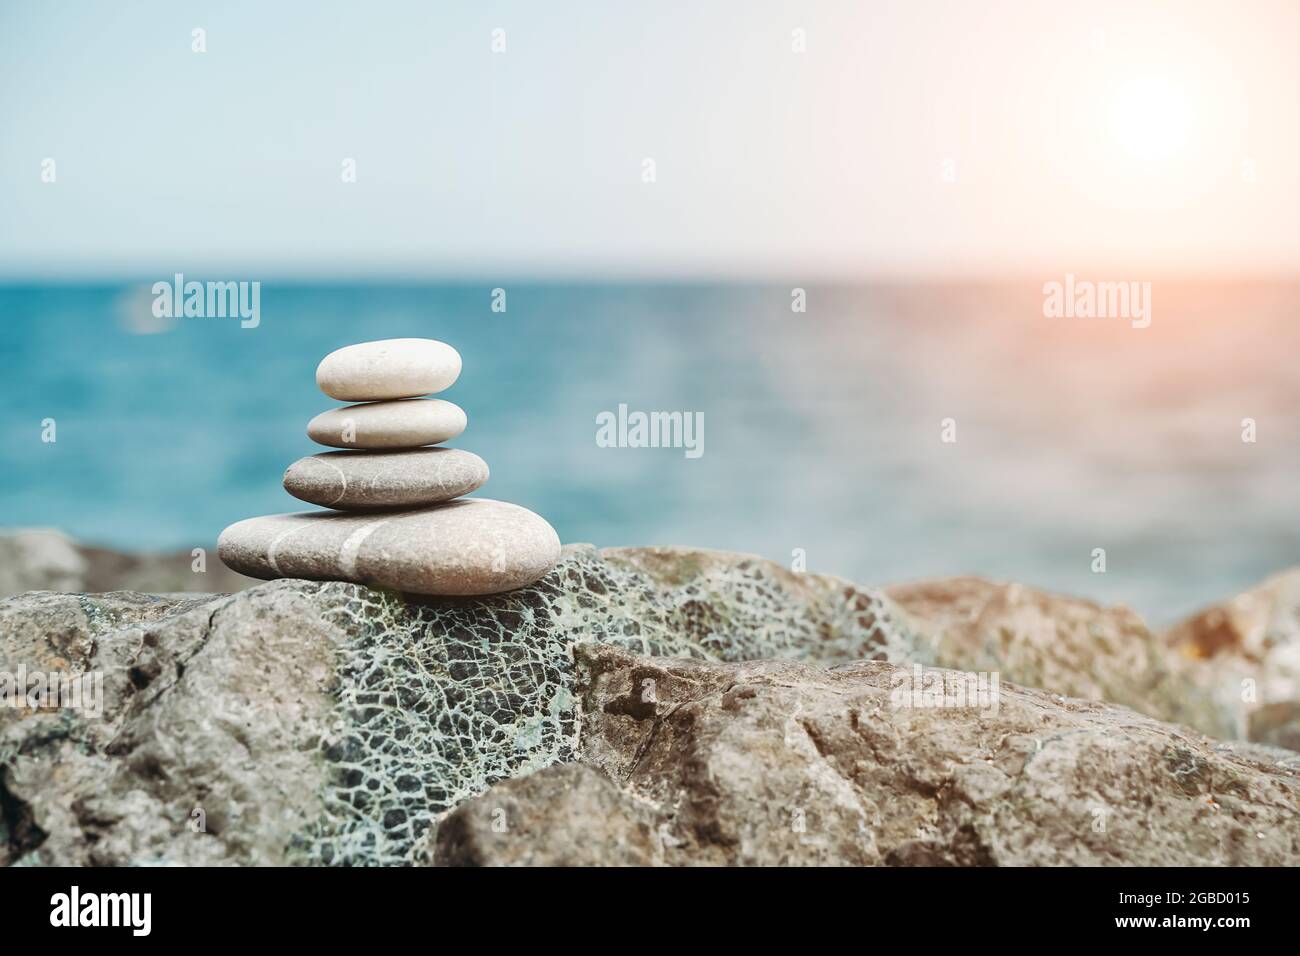 Zen stones are background. A pyramid of pebble stones against the background of the sky, sea and beach. Meditation, yoga, calming the mind and relaxation concept. High quality photo Stock Photo